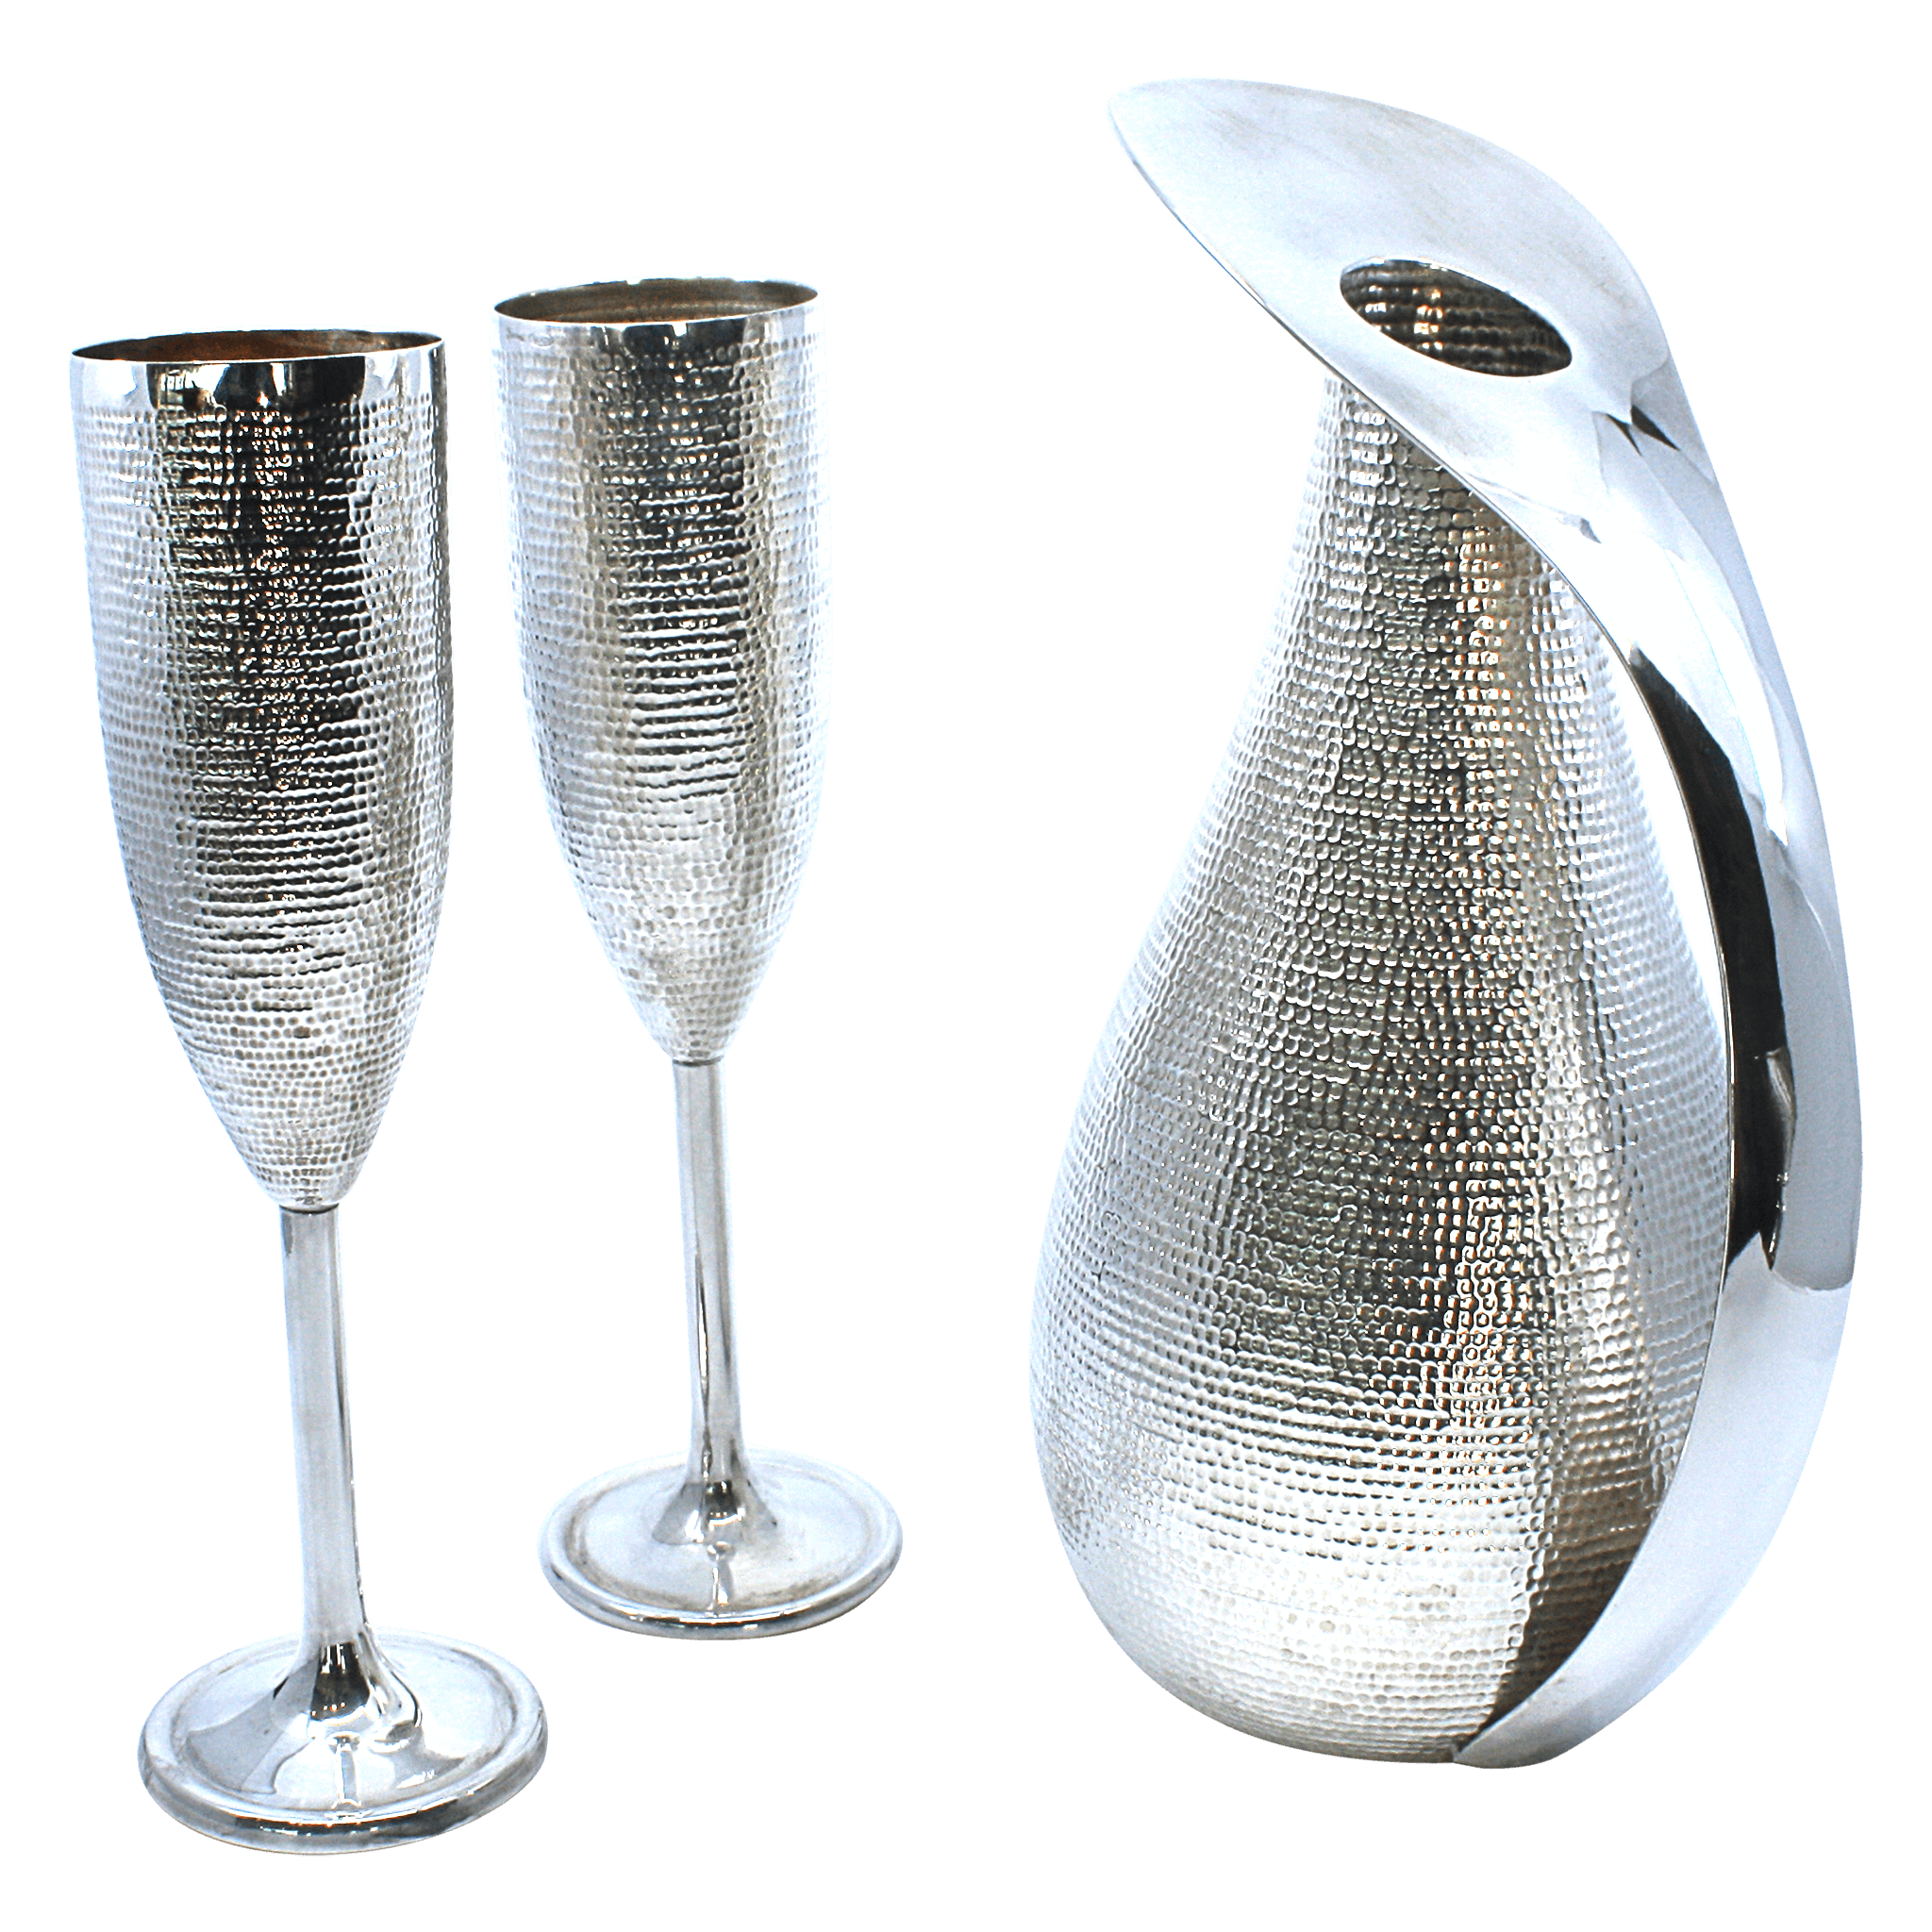 Pitcher and Champagne Glasses - Piece By Zion Hadad